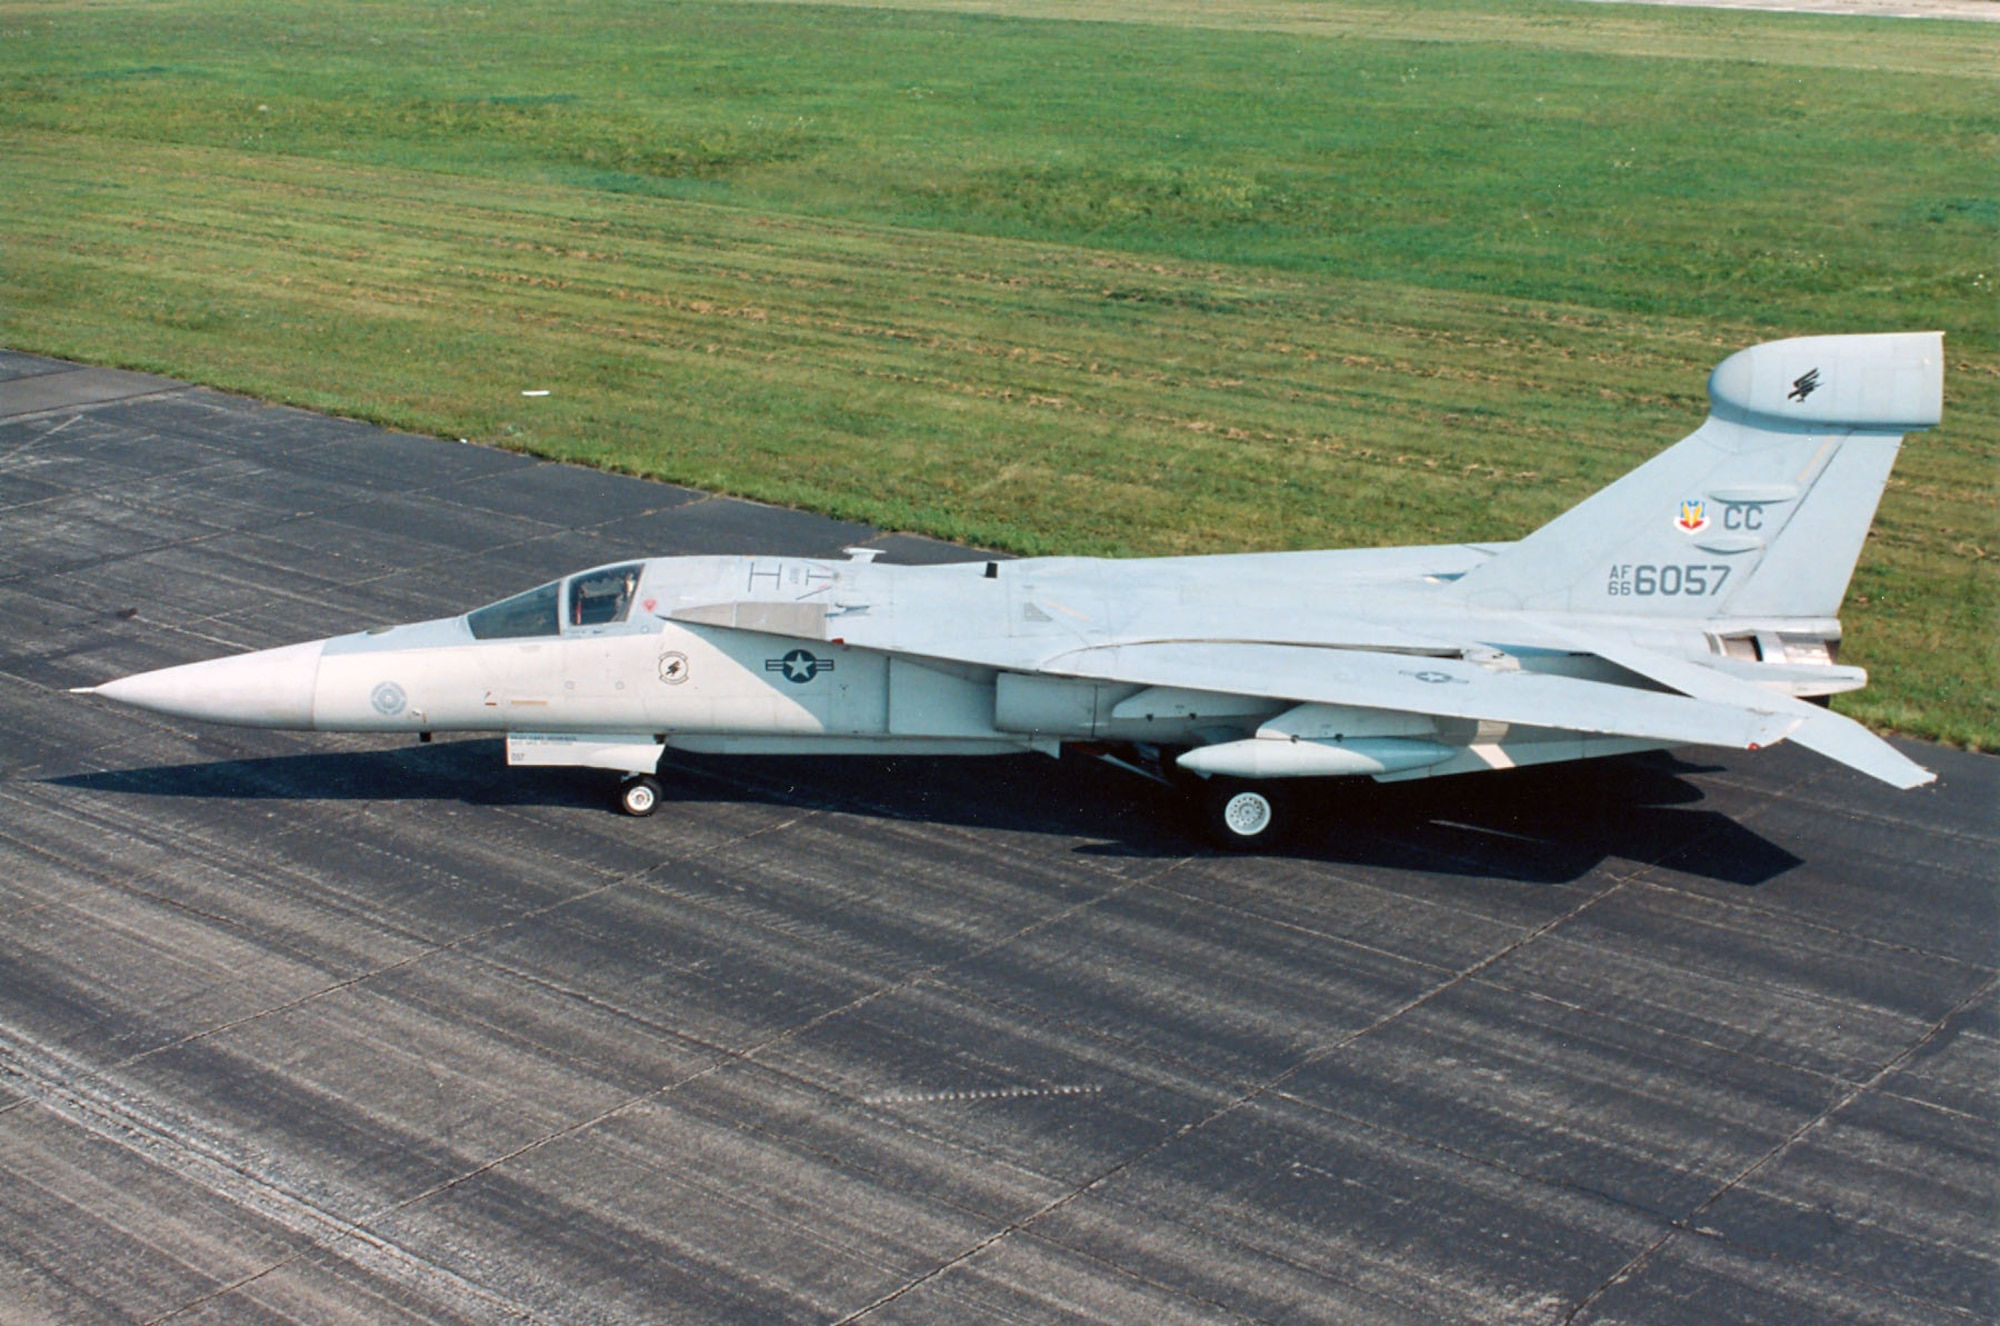 DAYTON, Ohio -- General Dynamics EF-111A Raven at the National Museum of the United States Air Force. (U.S. Air Force photo)